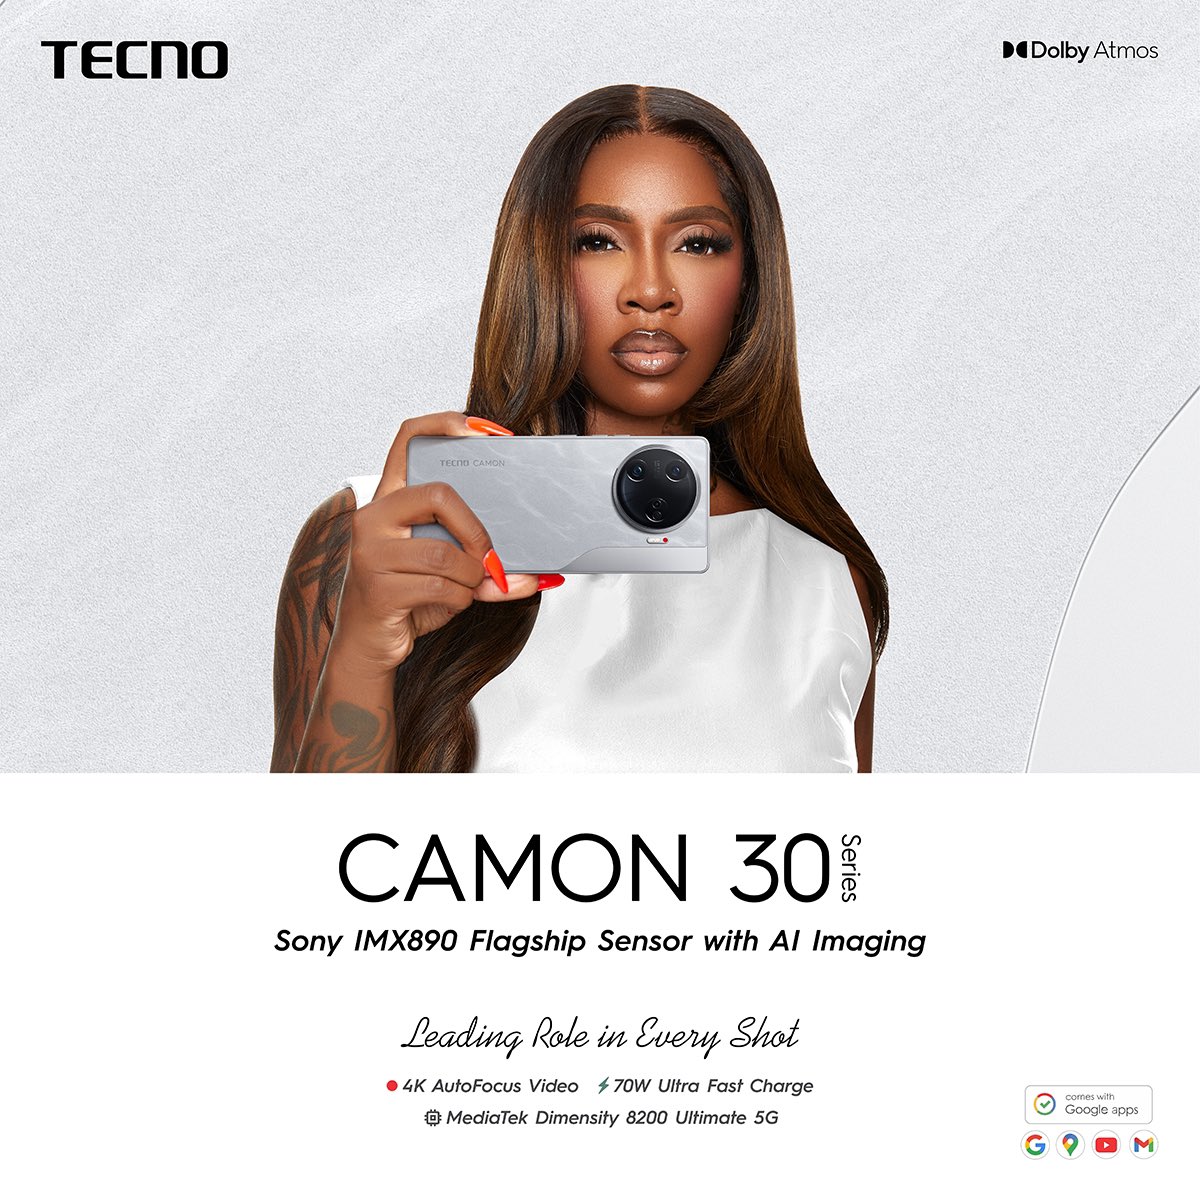 Say hey to the game-changing TECNO CAMON 30 Series! Visit TECNO stores to pre-order and get amazing offers #CAMON30Series #LeadingRole